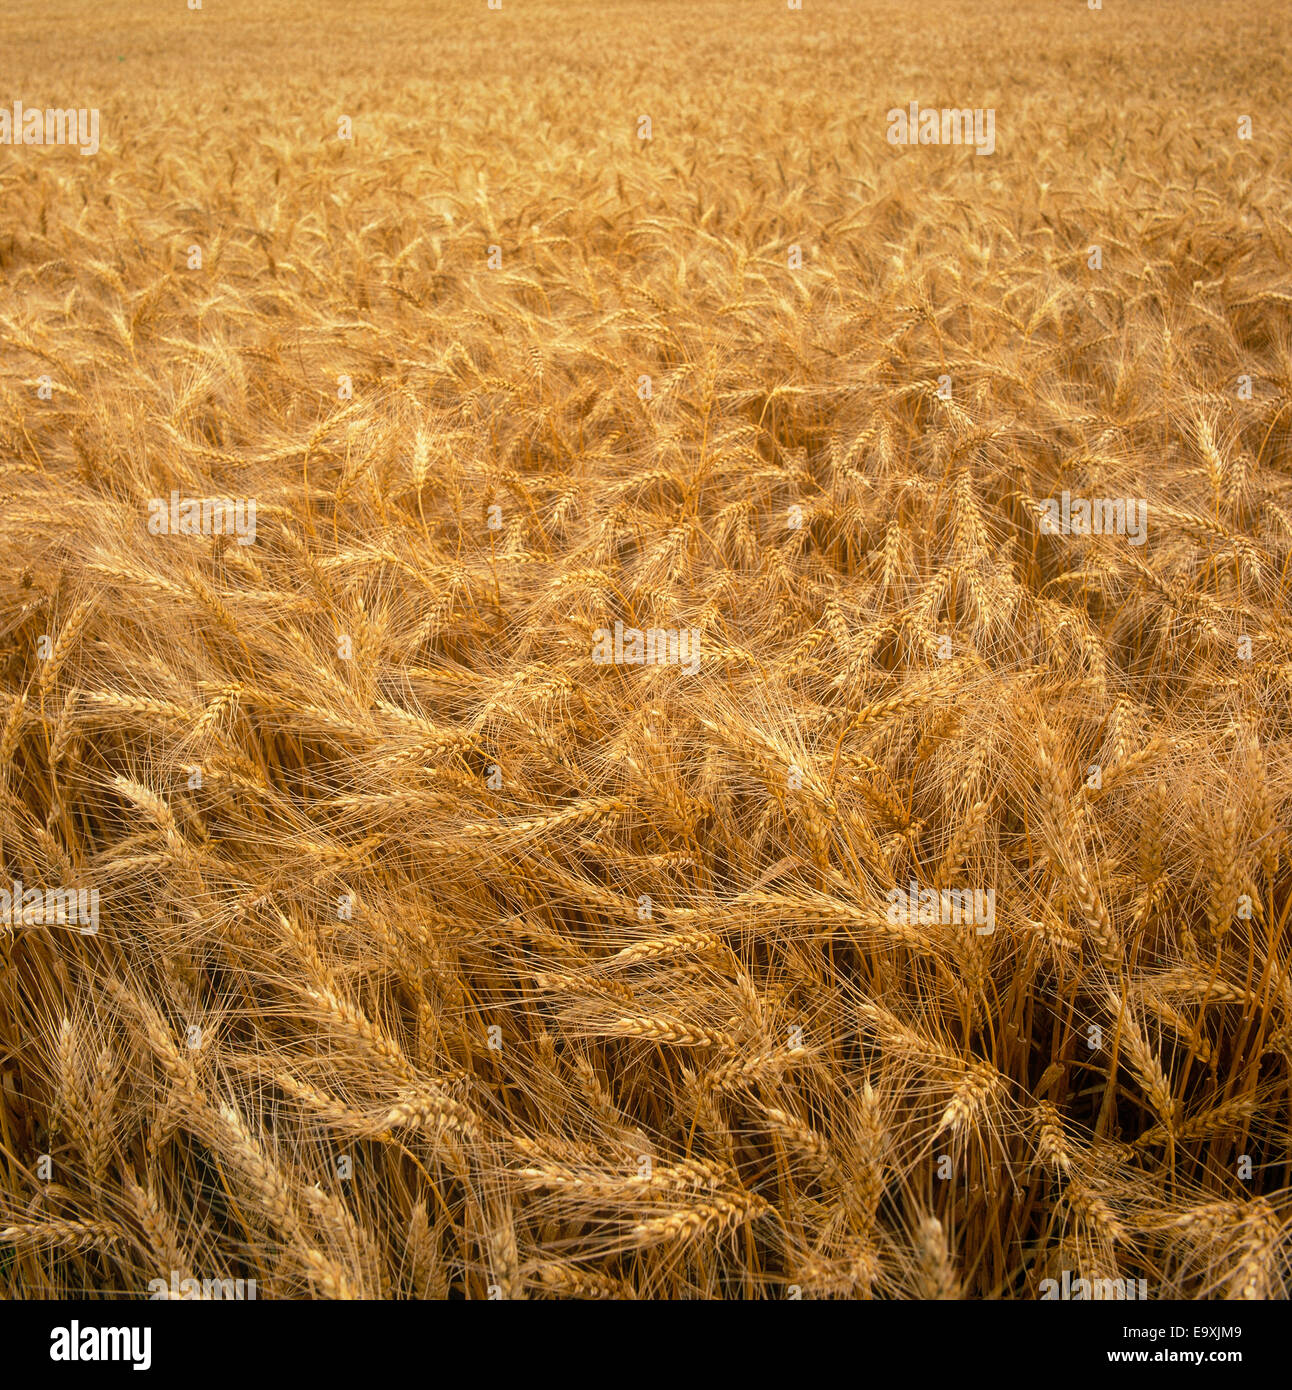 Agriculture - Crop of mature awned, or bearded, wheat ready for harvest / Ontario, Canada. Stock Photo